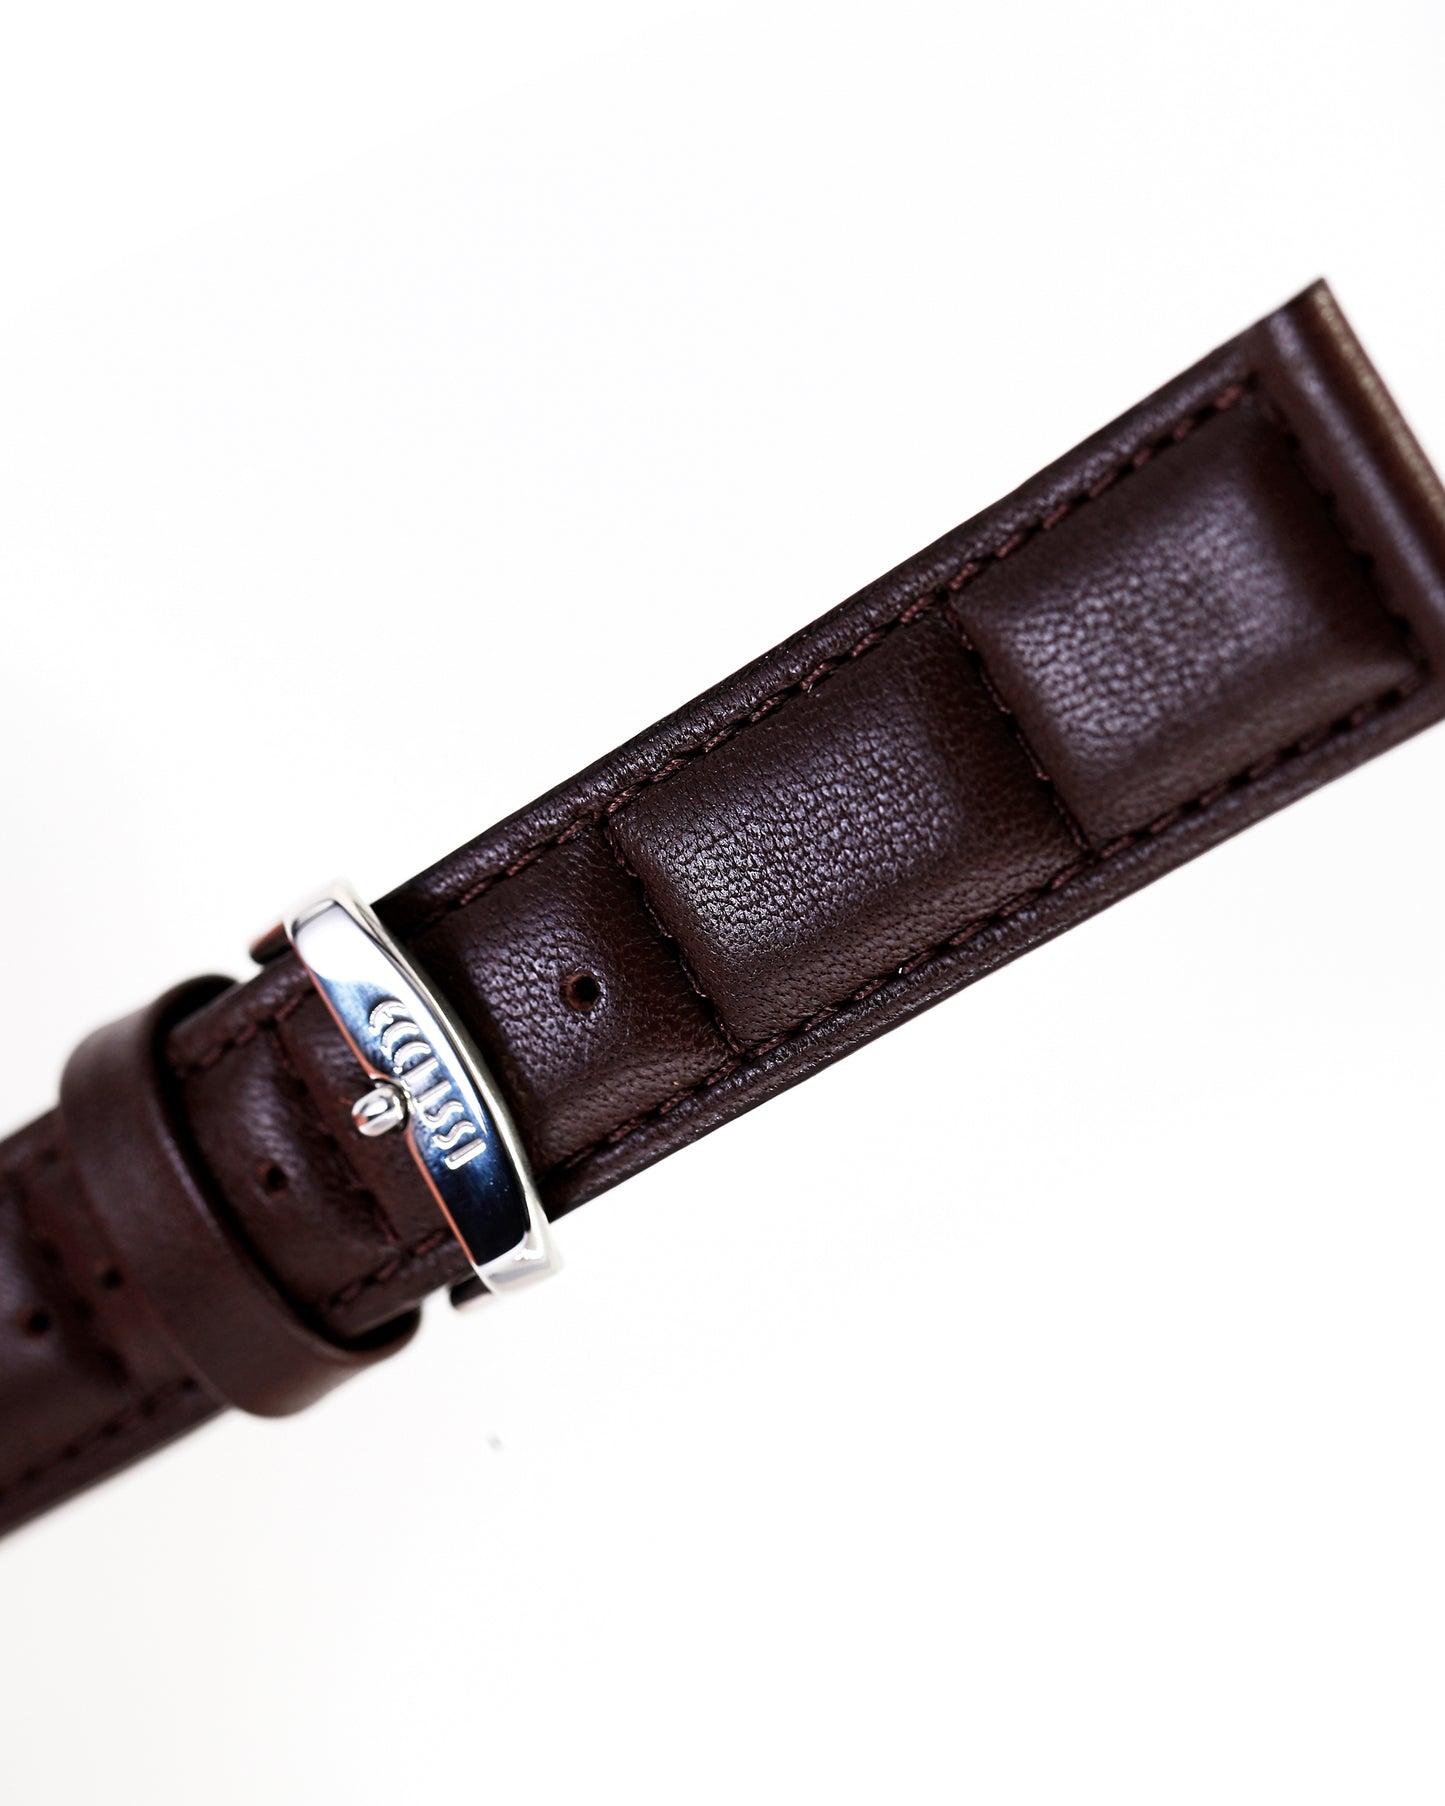 Ecclissi 20mm x 18mm Brown Leather Strap with original Buckle 75375